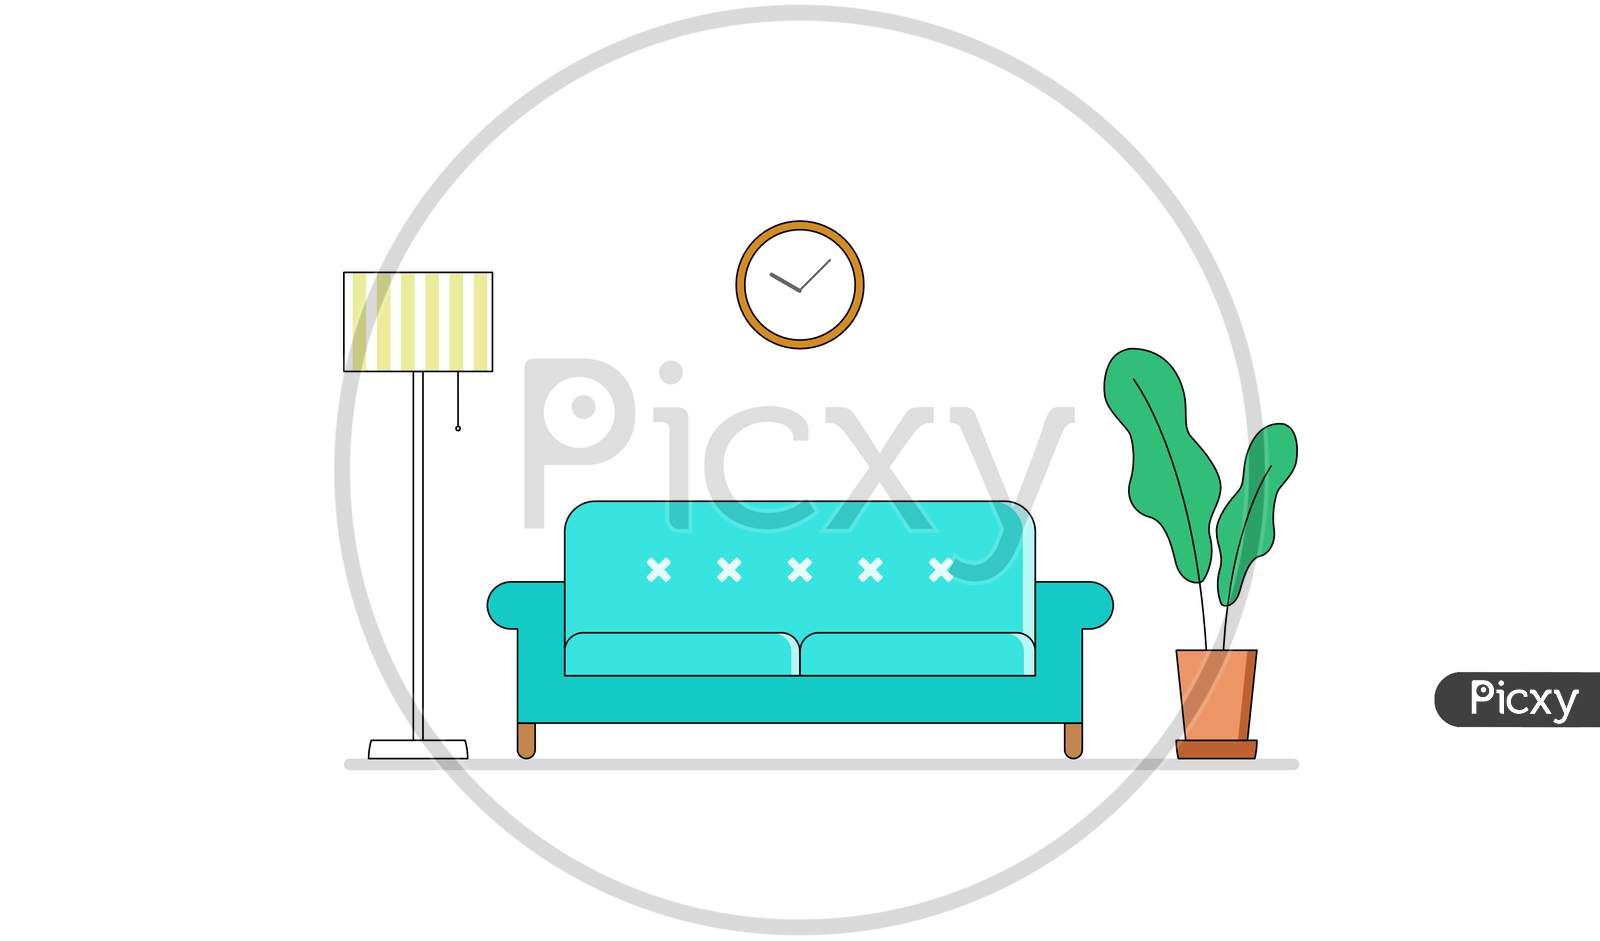 Living Room With Sofa Couch Chair Pot Of Tree And Round Clock